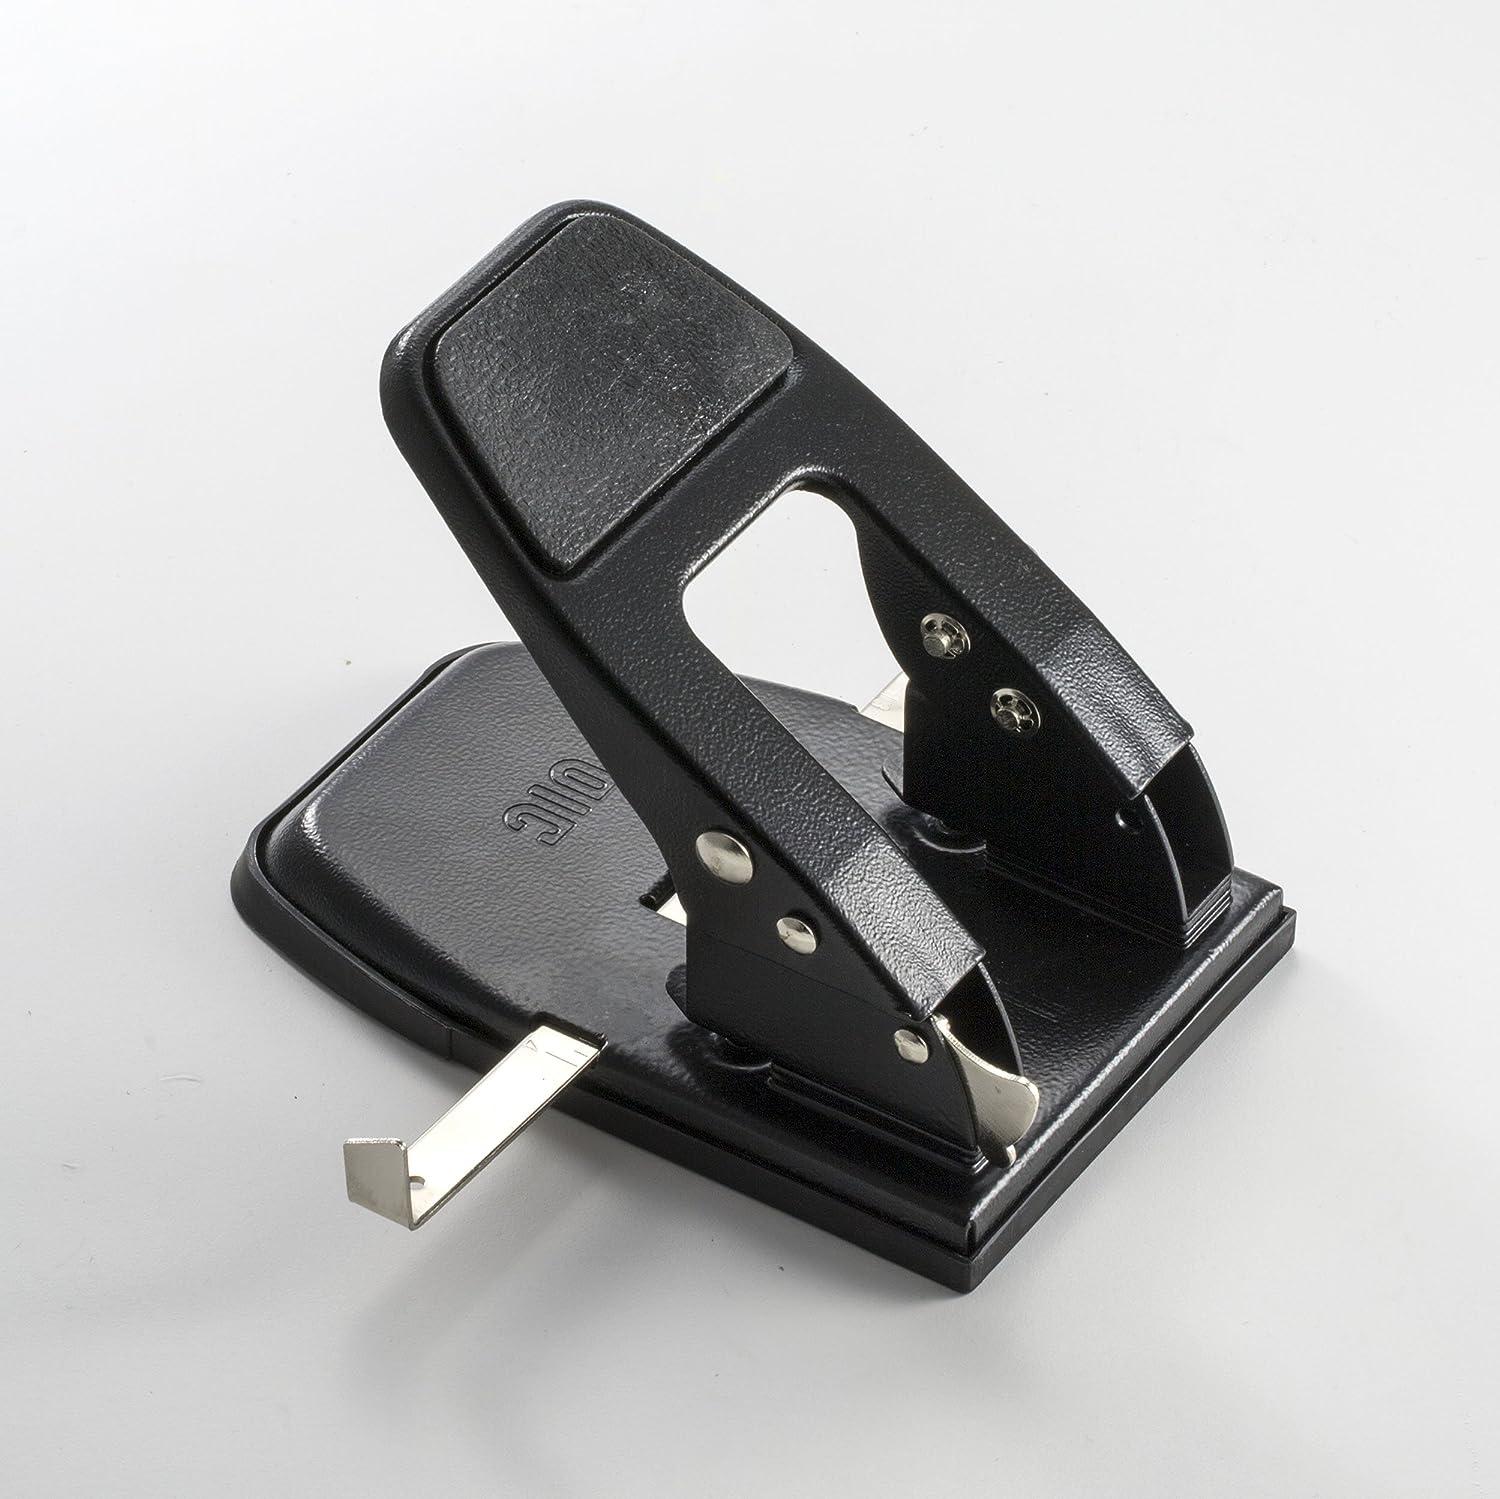  Officemate Heavy Duty 2-Hole Punch, Padded Handle